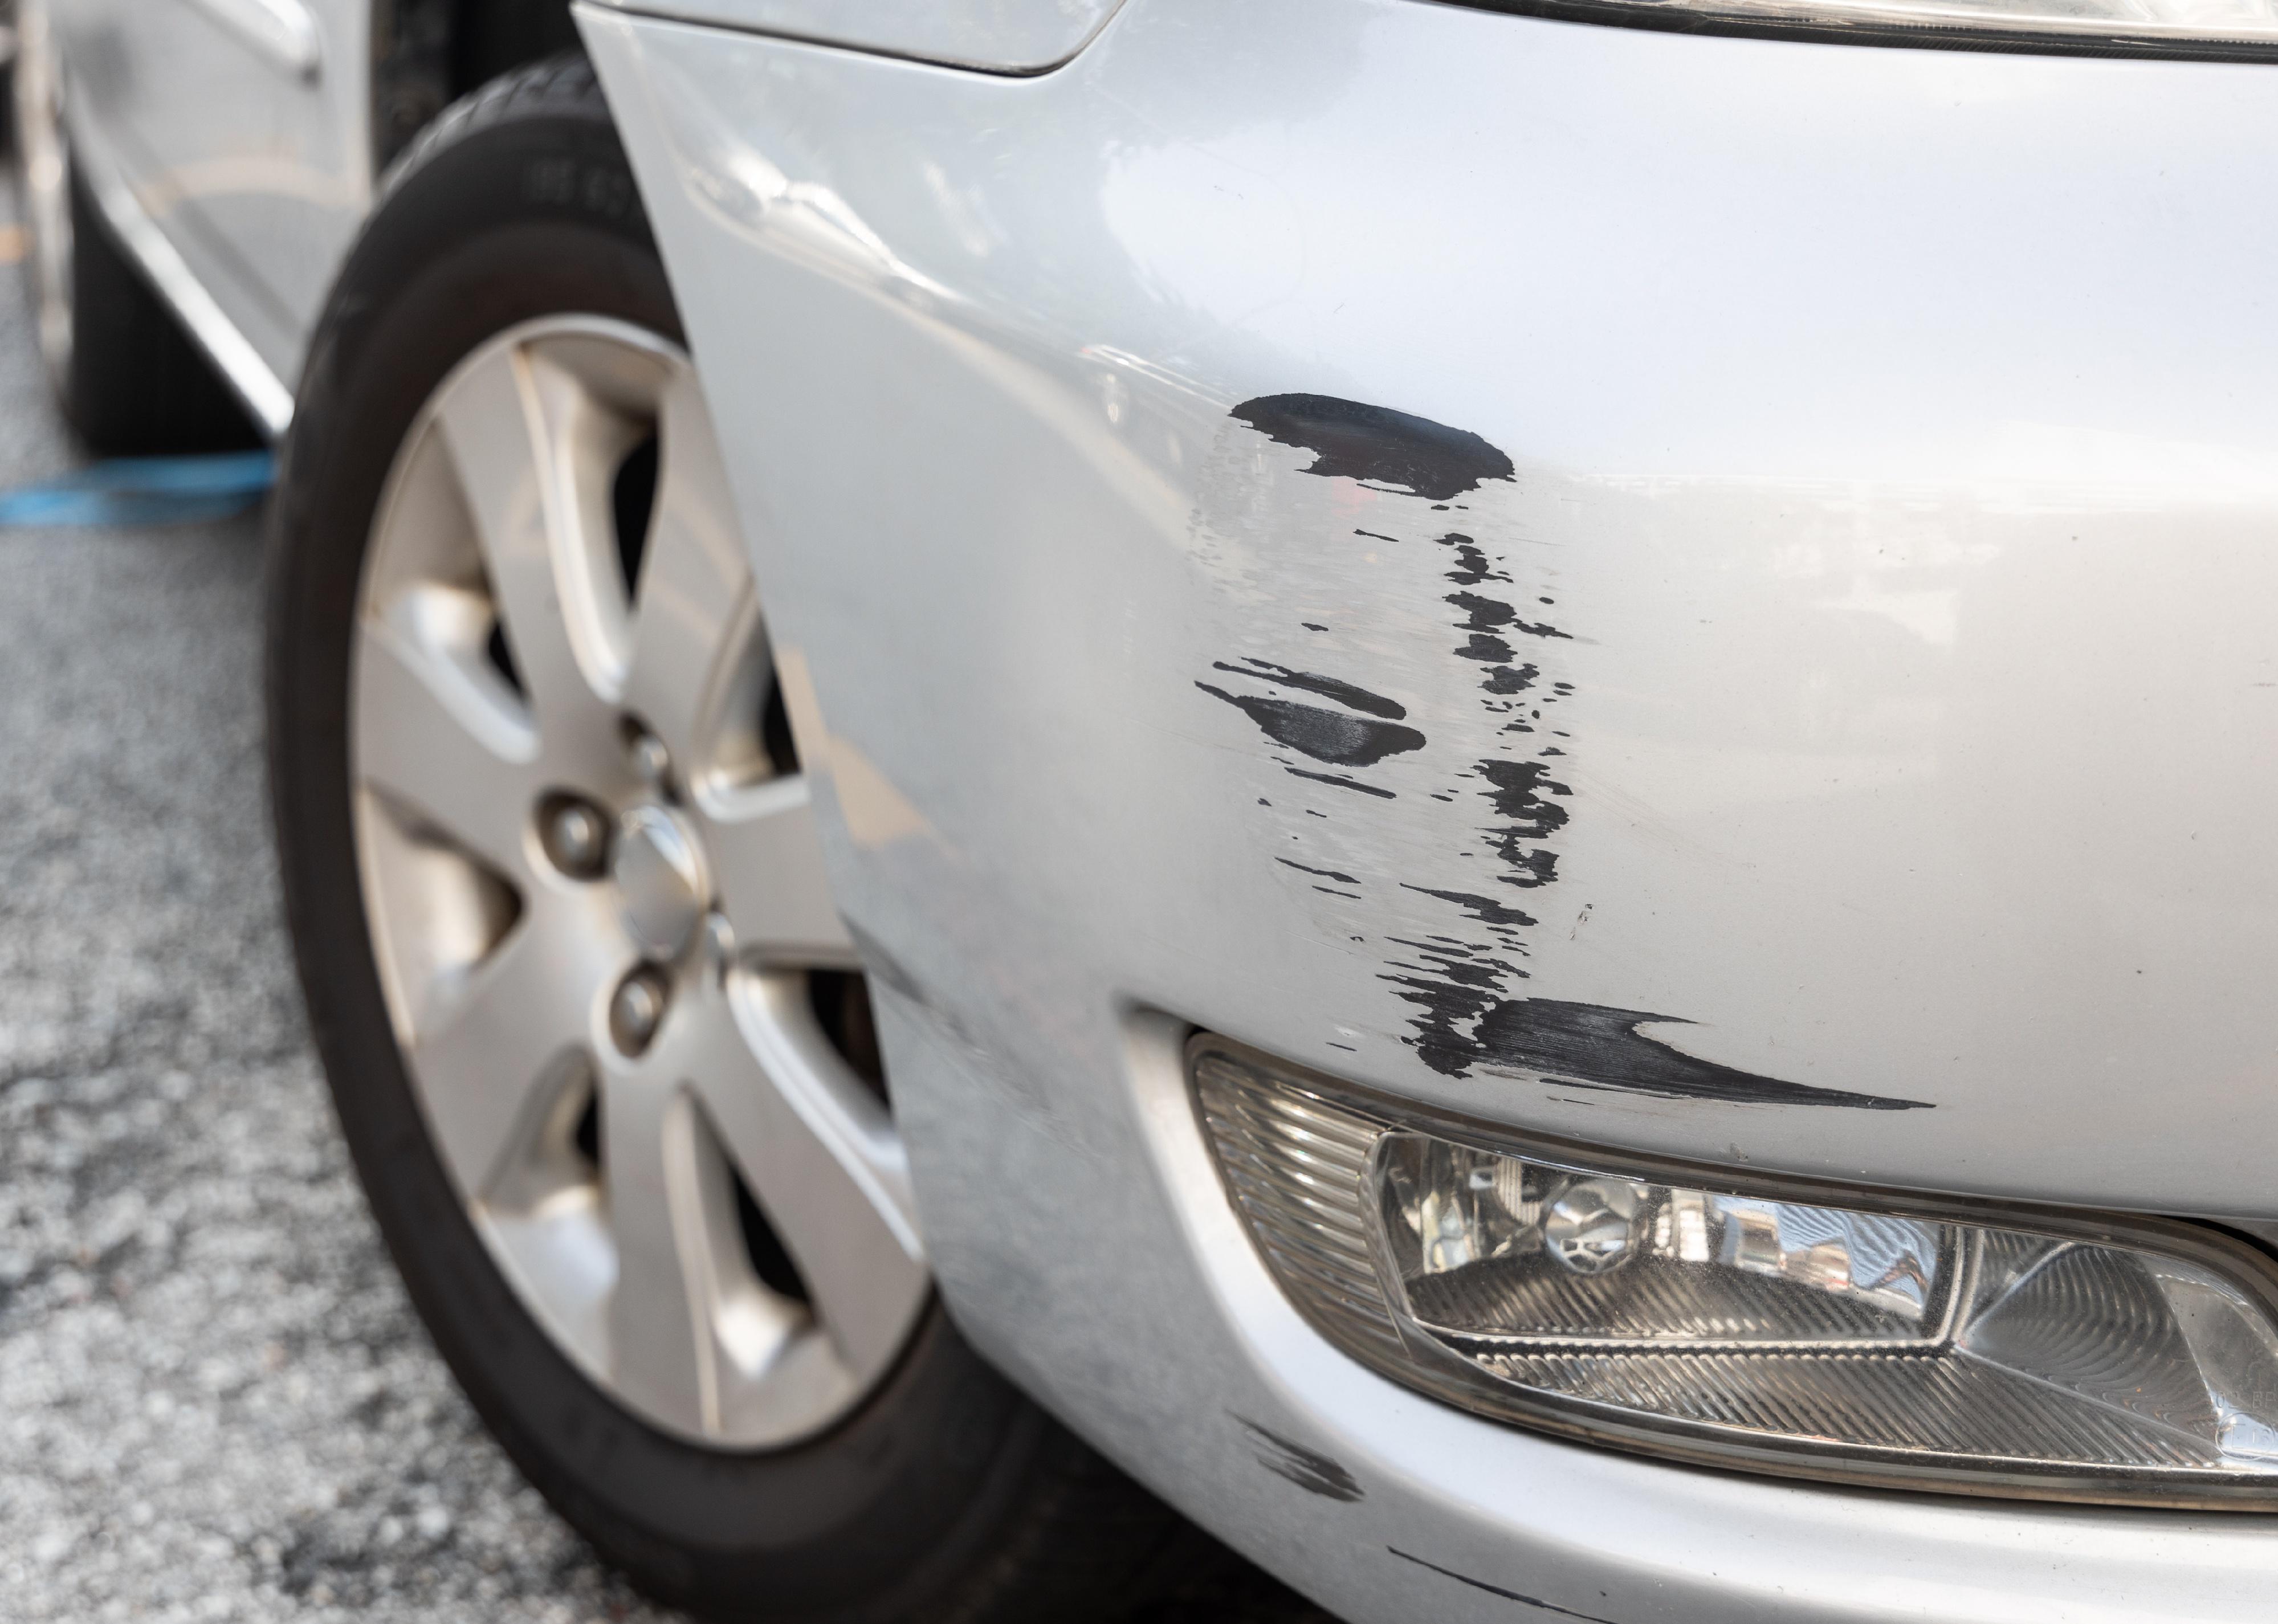 Abrasion of scratches on the front bumper of the car